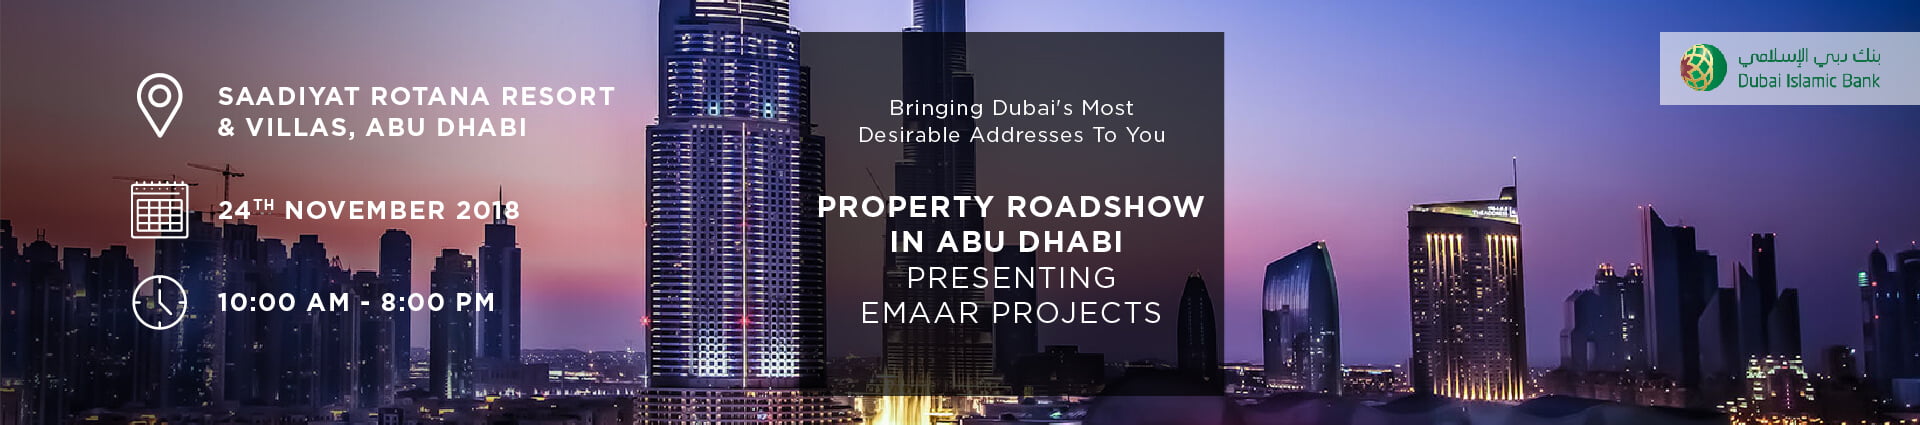 New Roadshow banners Recovered 09 - Emaar DIB Exclusive